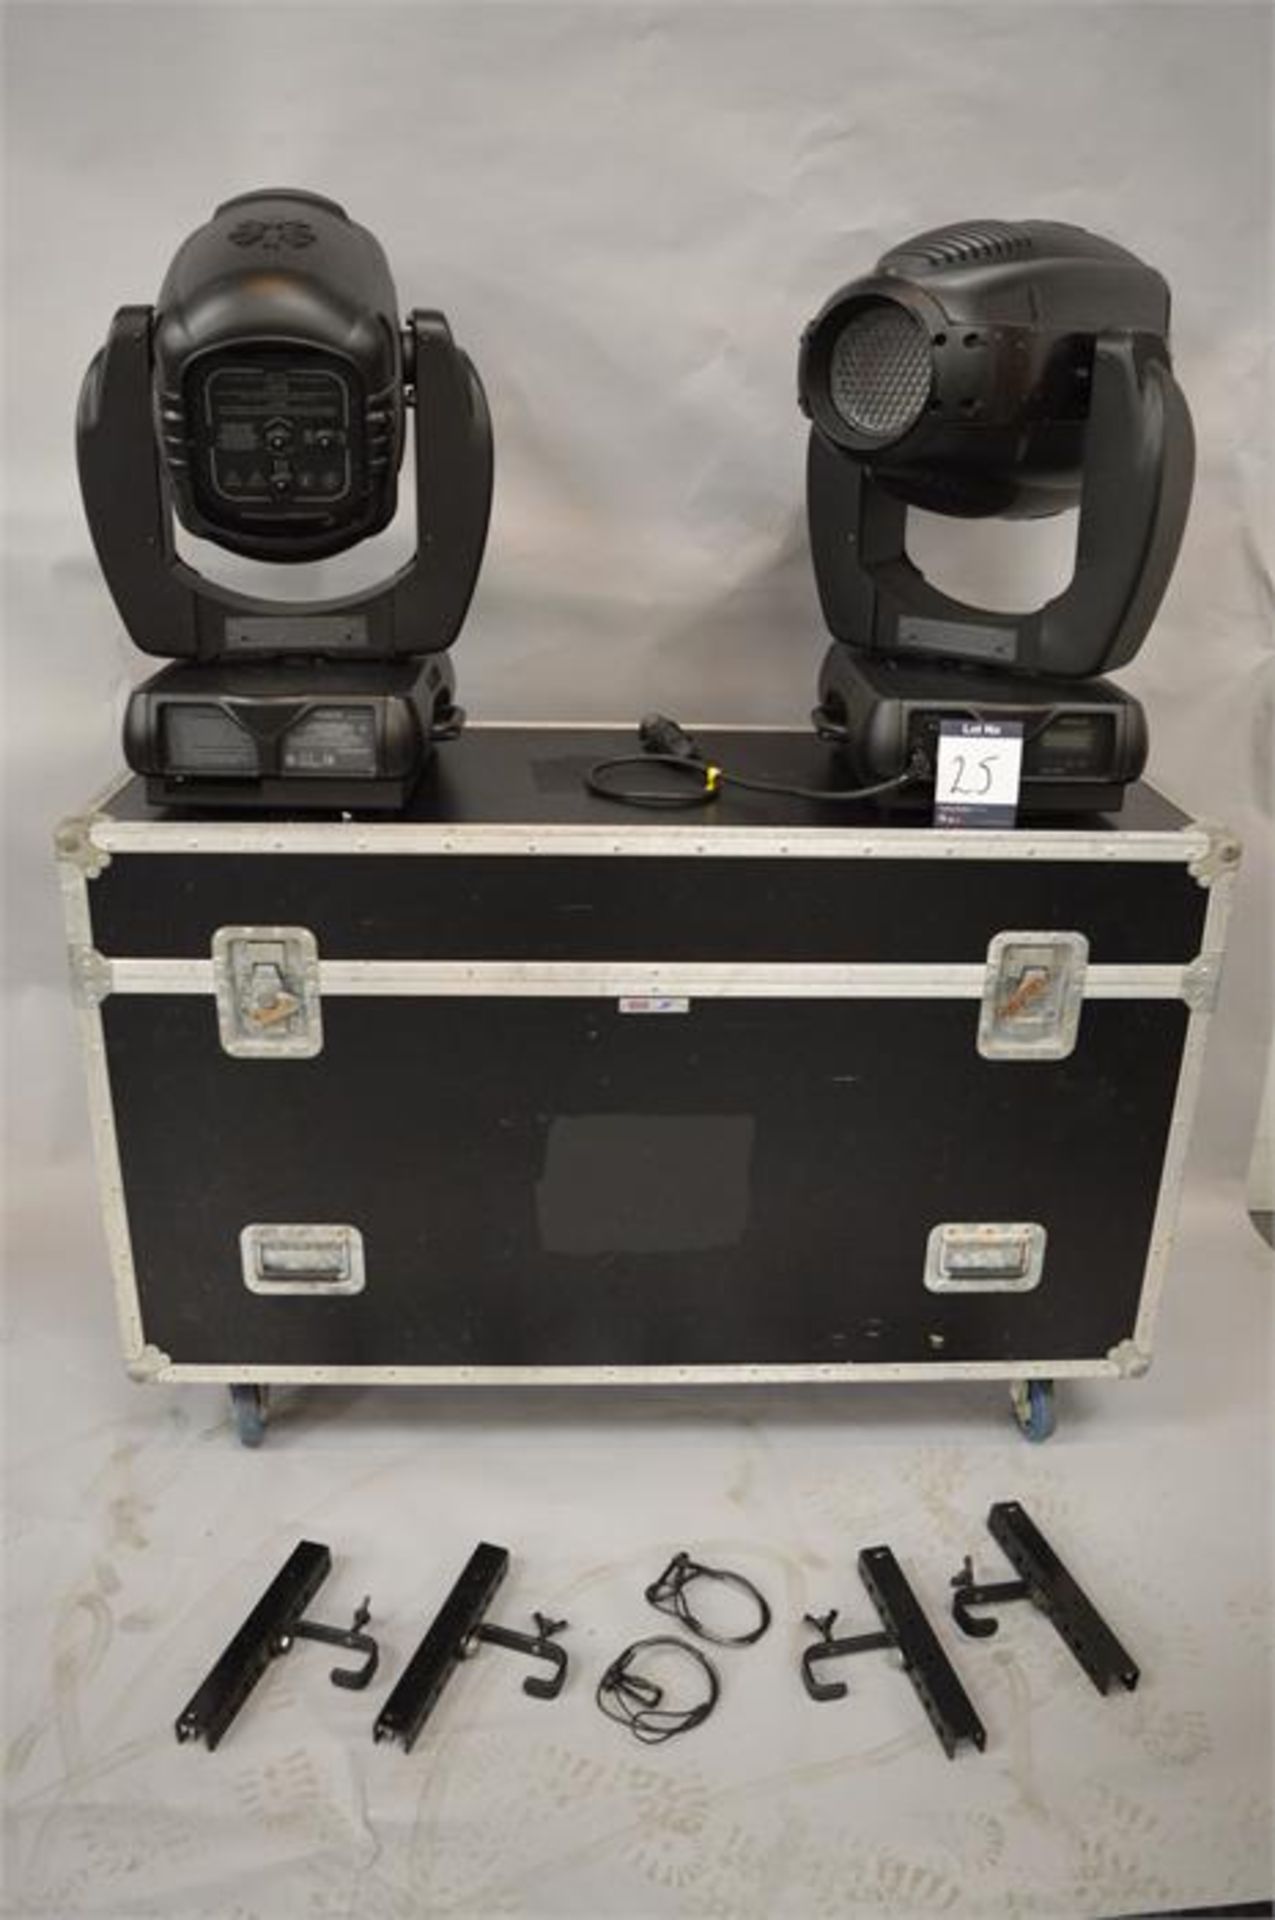 2 x Varilite, VL3000QW Wash Moving Head Lights with Flightcase and associated Brackets, as lotted - Image 4 of 4